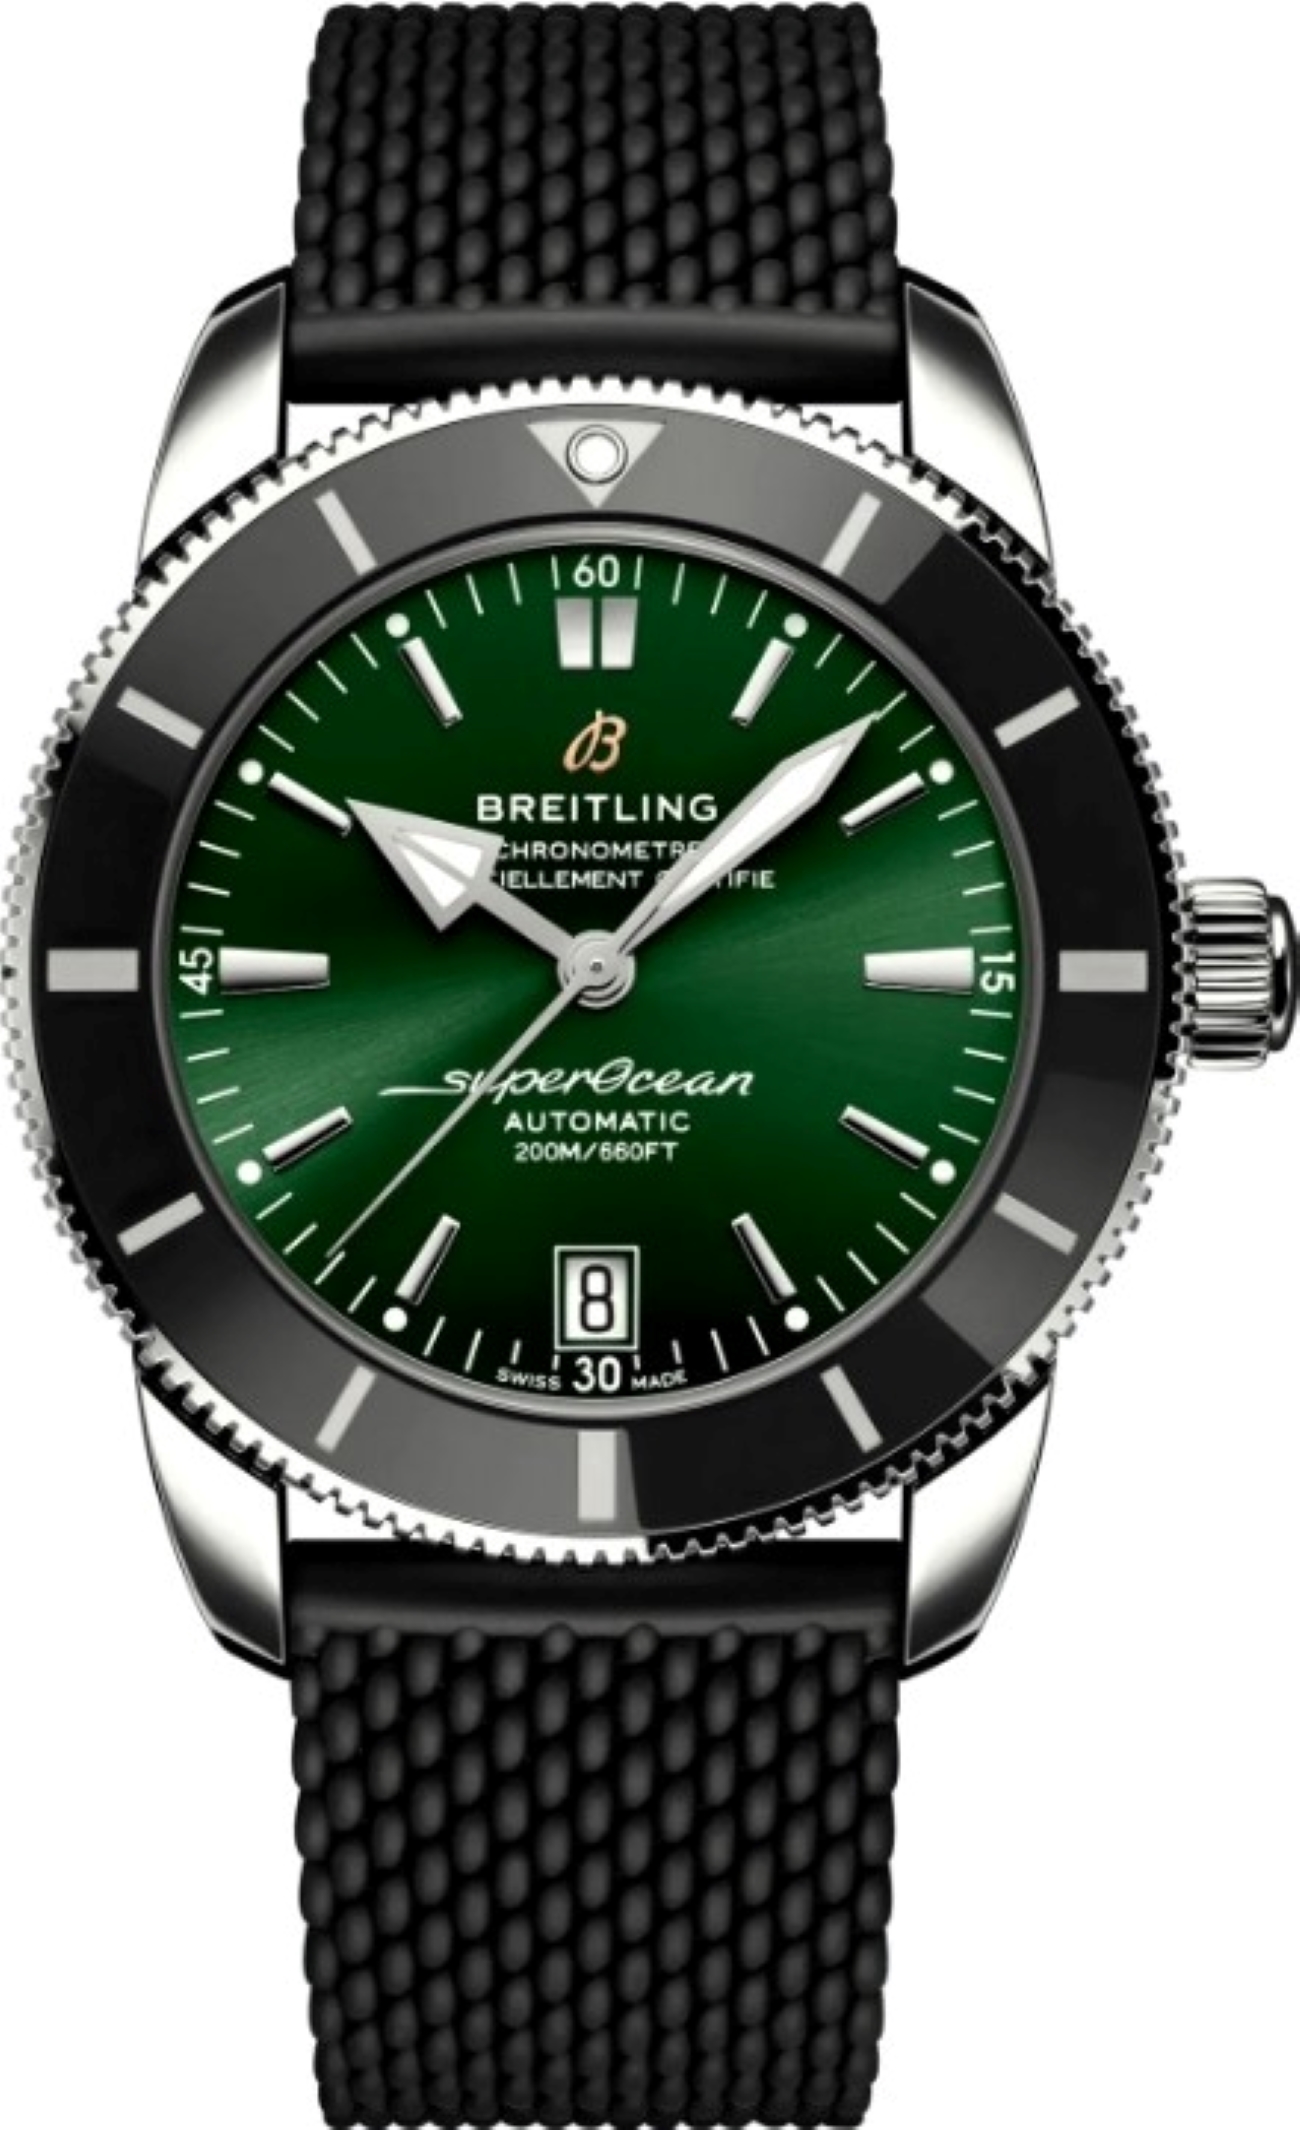 BREITLING SUPEROCEAN HERITAGE 42MM GREEN DIAL REF: AB2010121L1S1